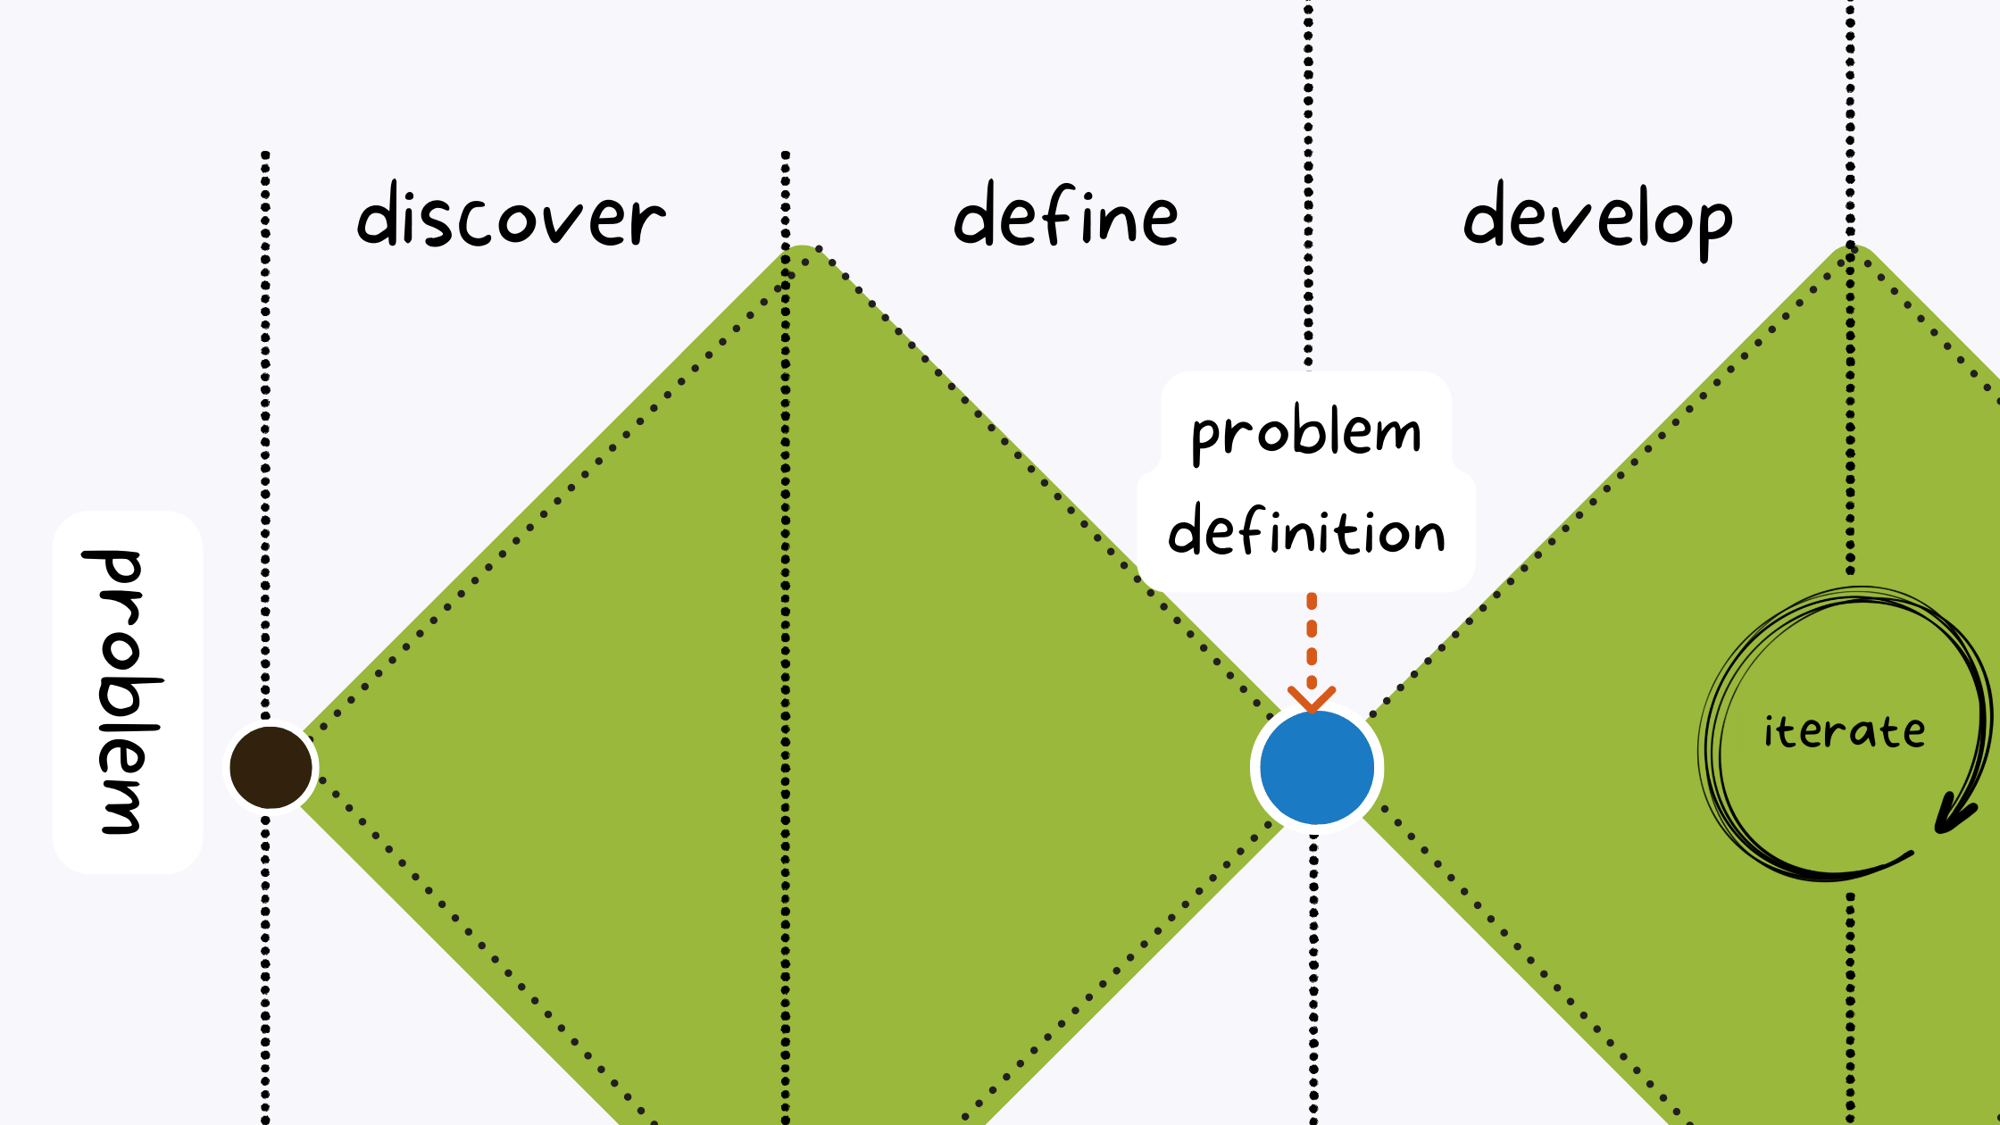 Cropped portion of the double diamond method diagram displaying only the left diamond of the process focused on Problem Statement to Definition portion.